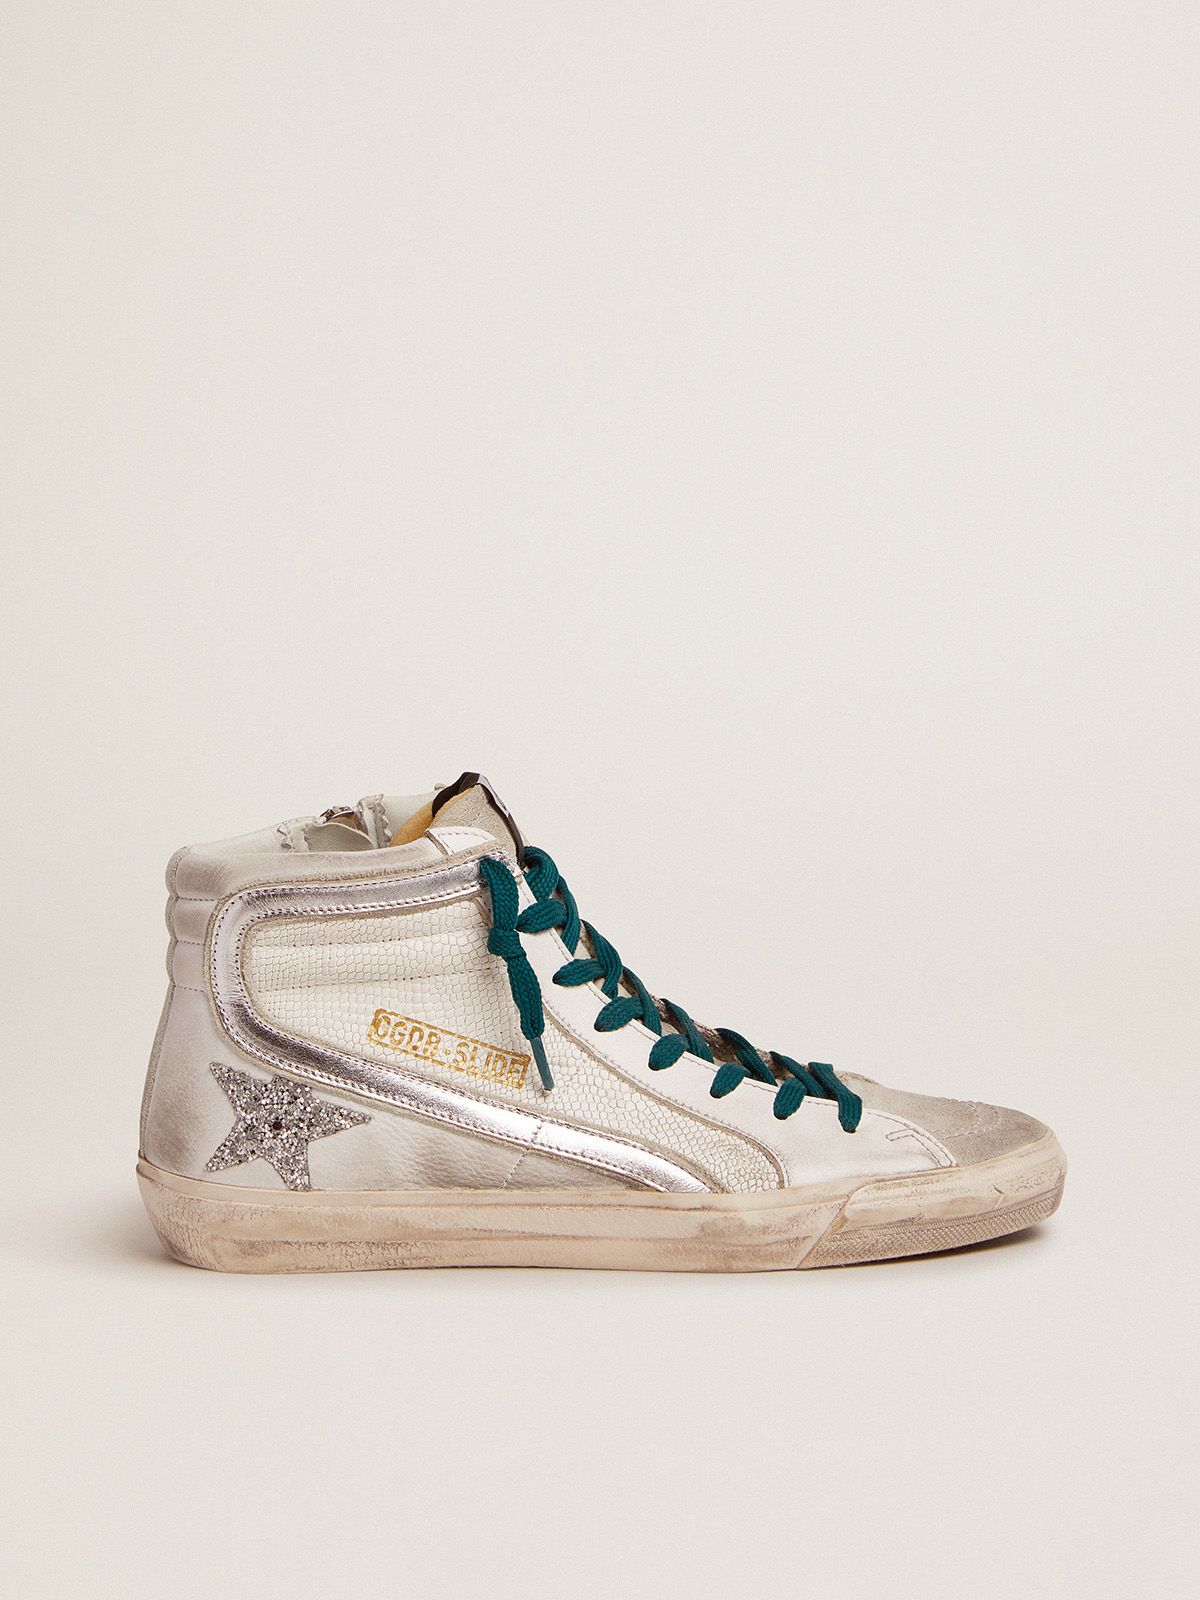 golden goose leather and with Slide snake-print upper sneakers silver glitter star